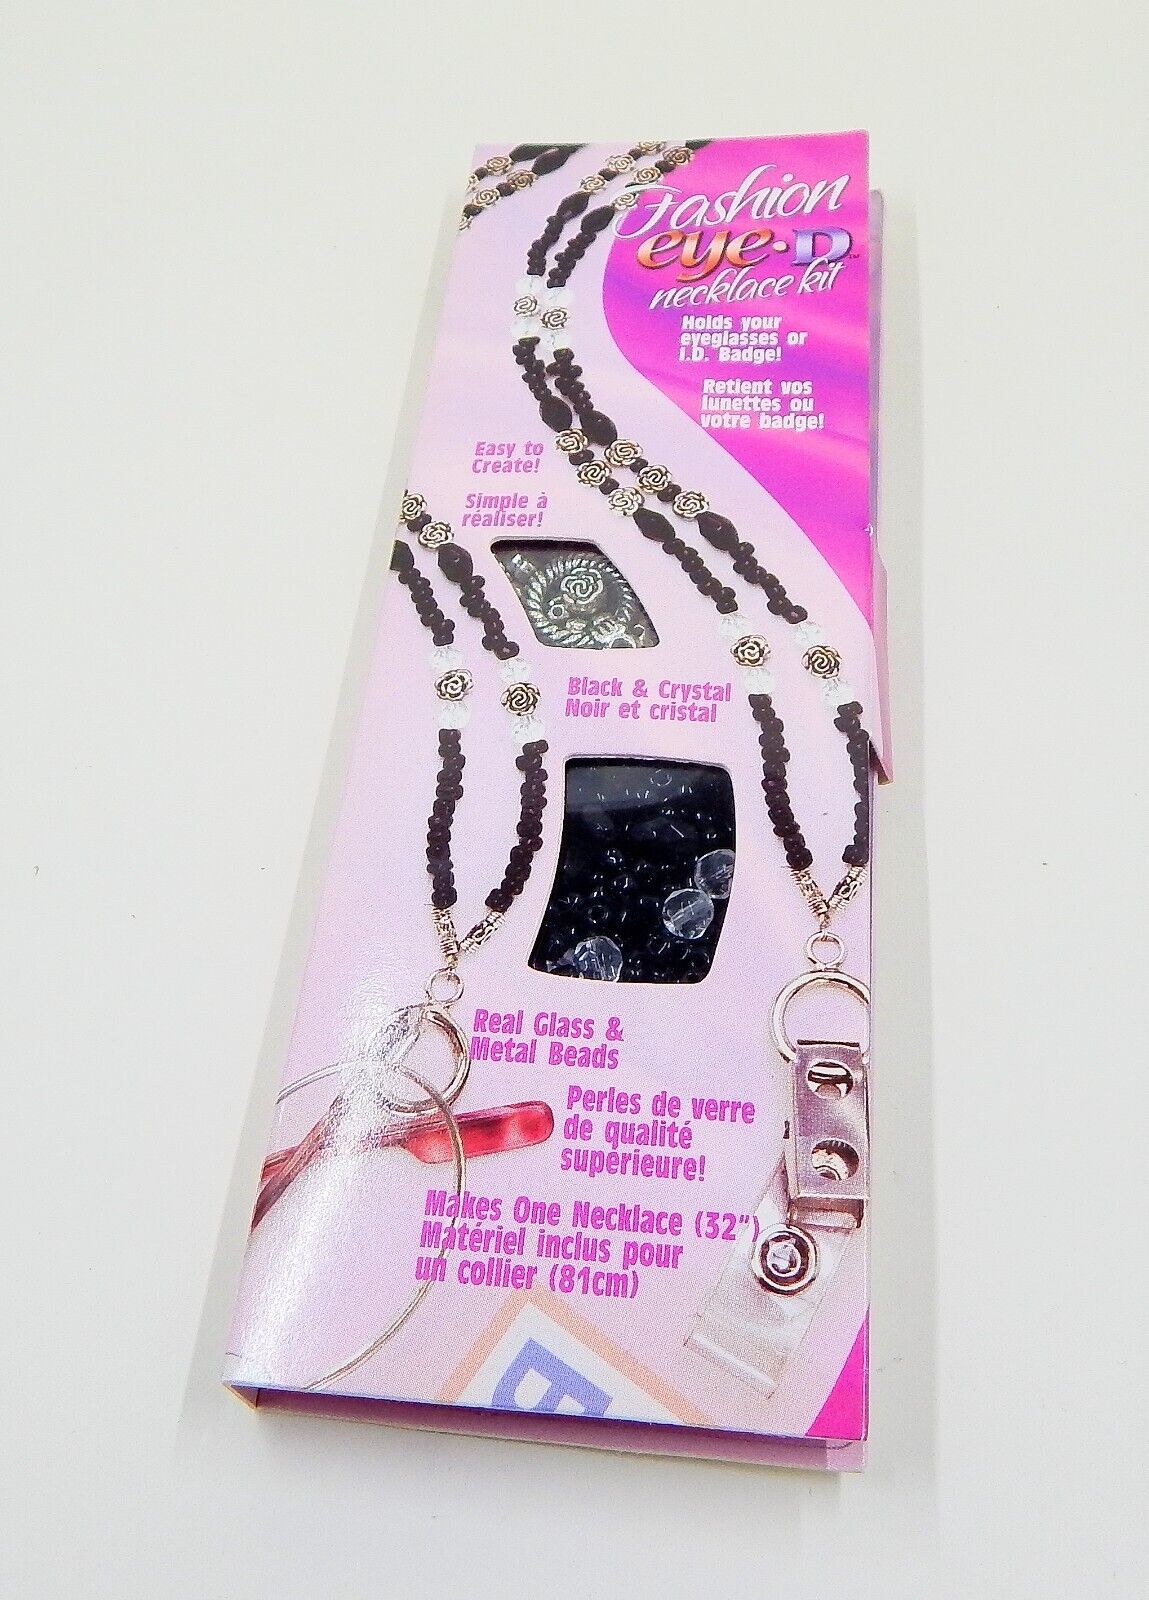 Fashion Eye-D Necklace Kit Glass Metal Jewelry Crafting DIY New Cousin Corp - $16.99